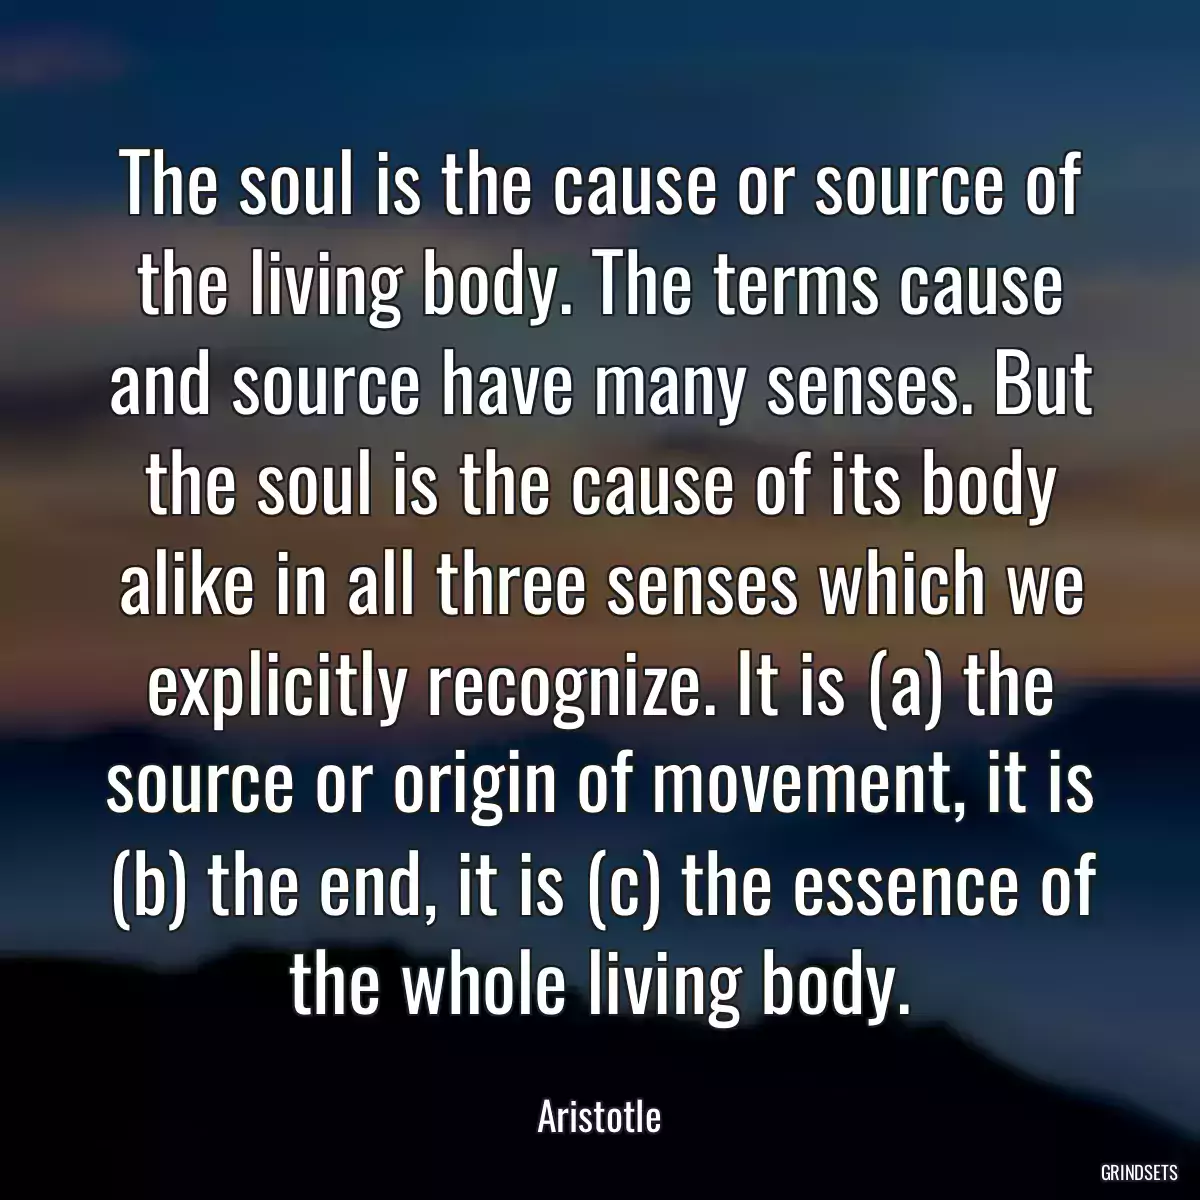 The soul is the cause or source of the living body. The terms cause and source have many senses. But the soul is the cause of its body alike in all three senses which we explicitly recognize. It is (a) the source or origin of movement, it is (b) the end, it is (c) the essence of the whole living body.